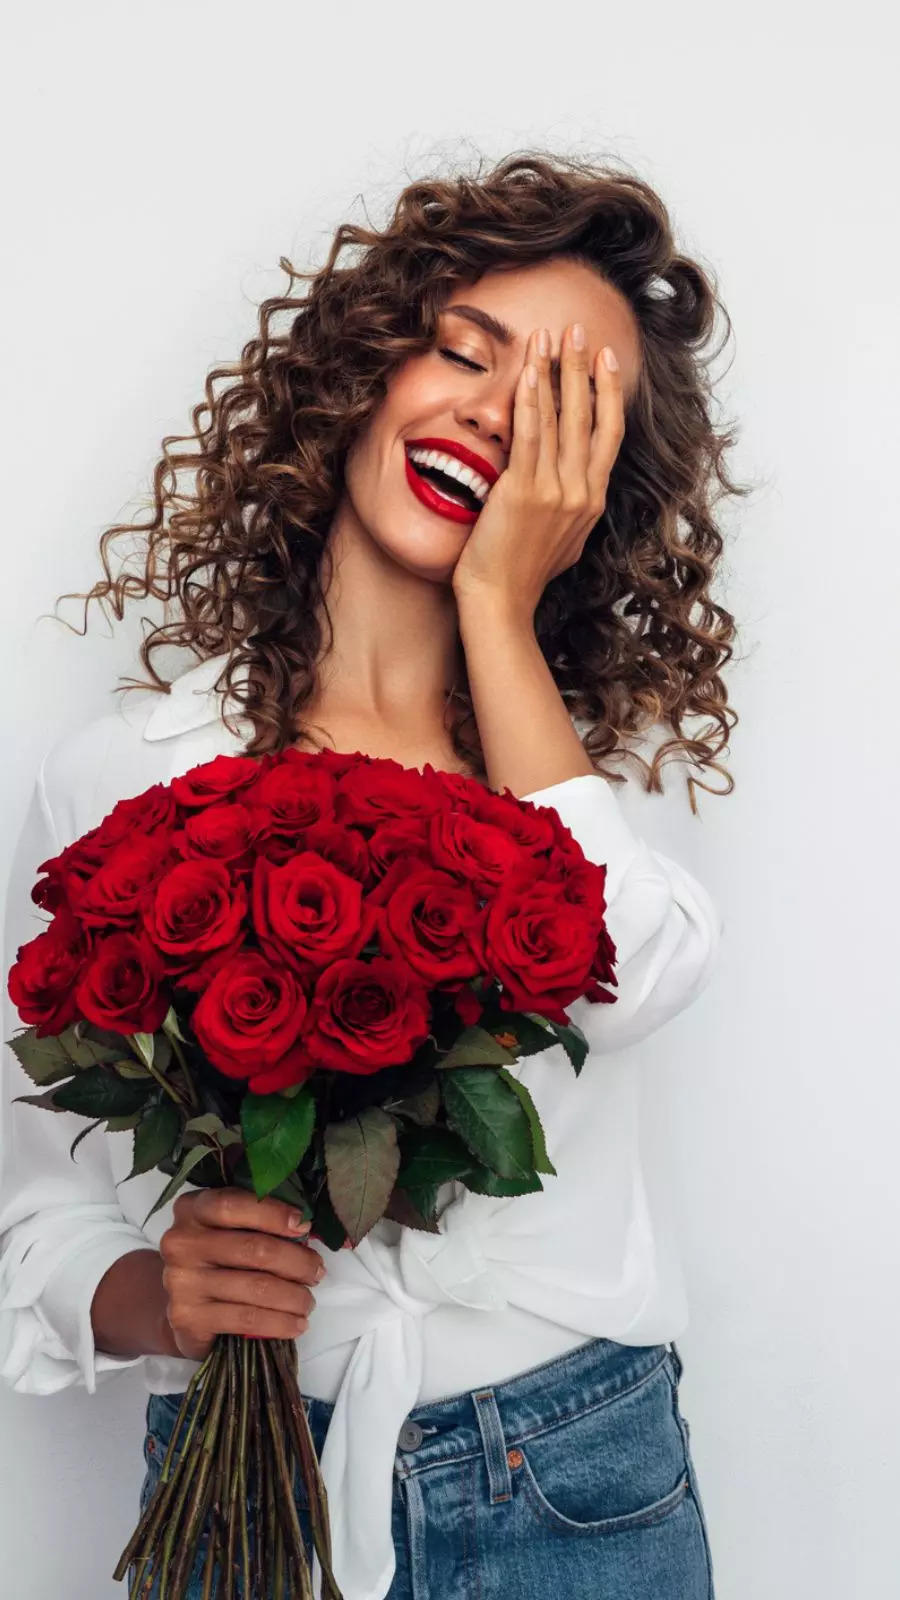 How to preserve the rose given by your Valentine? 3 methods